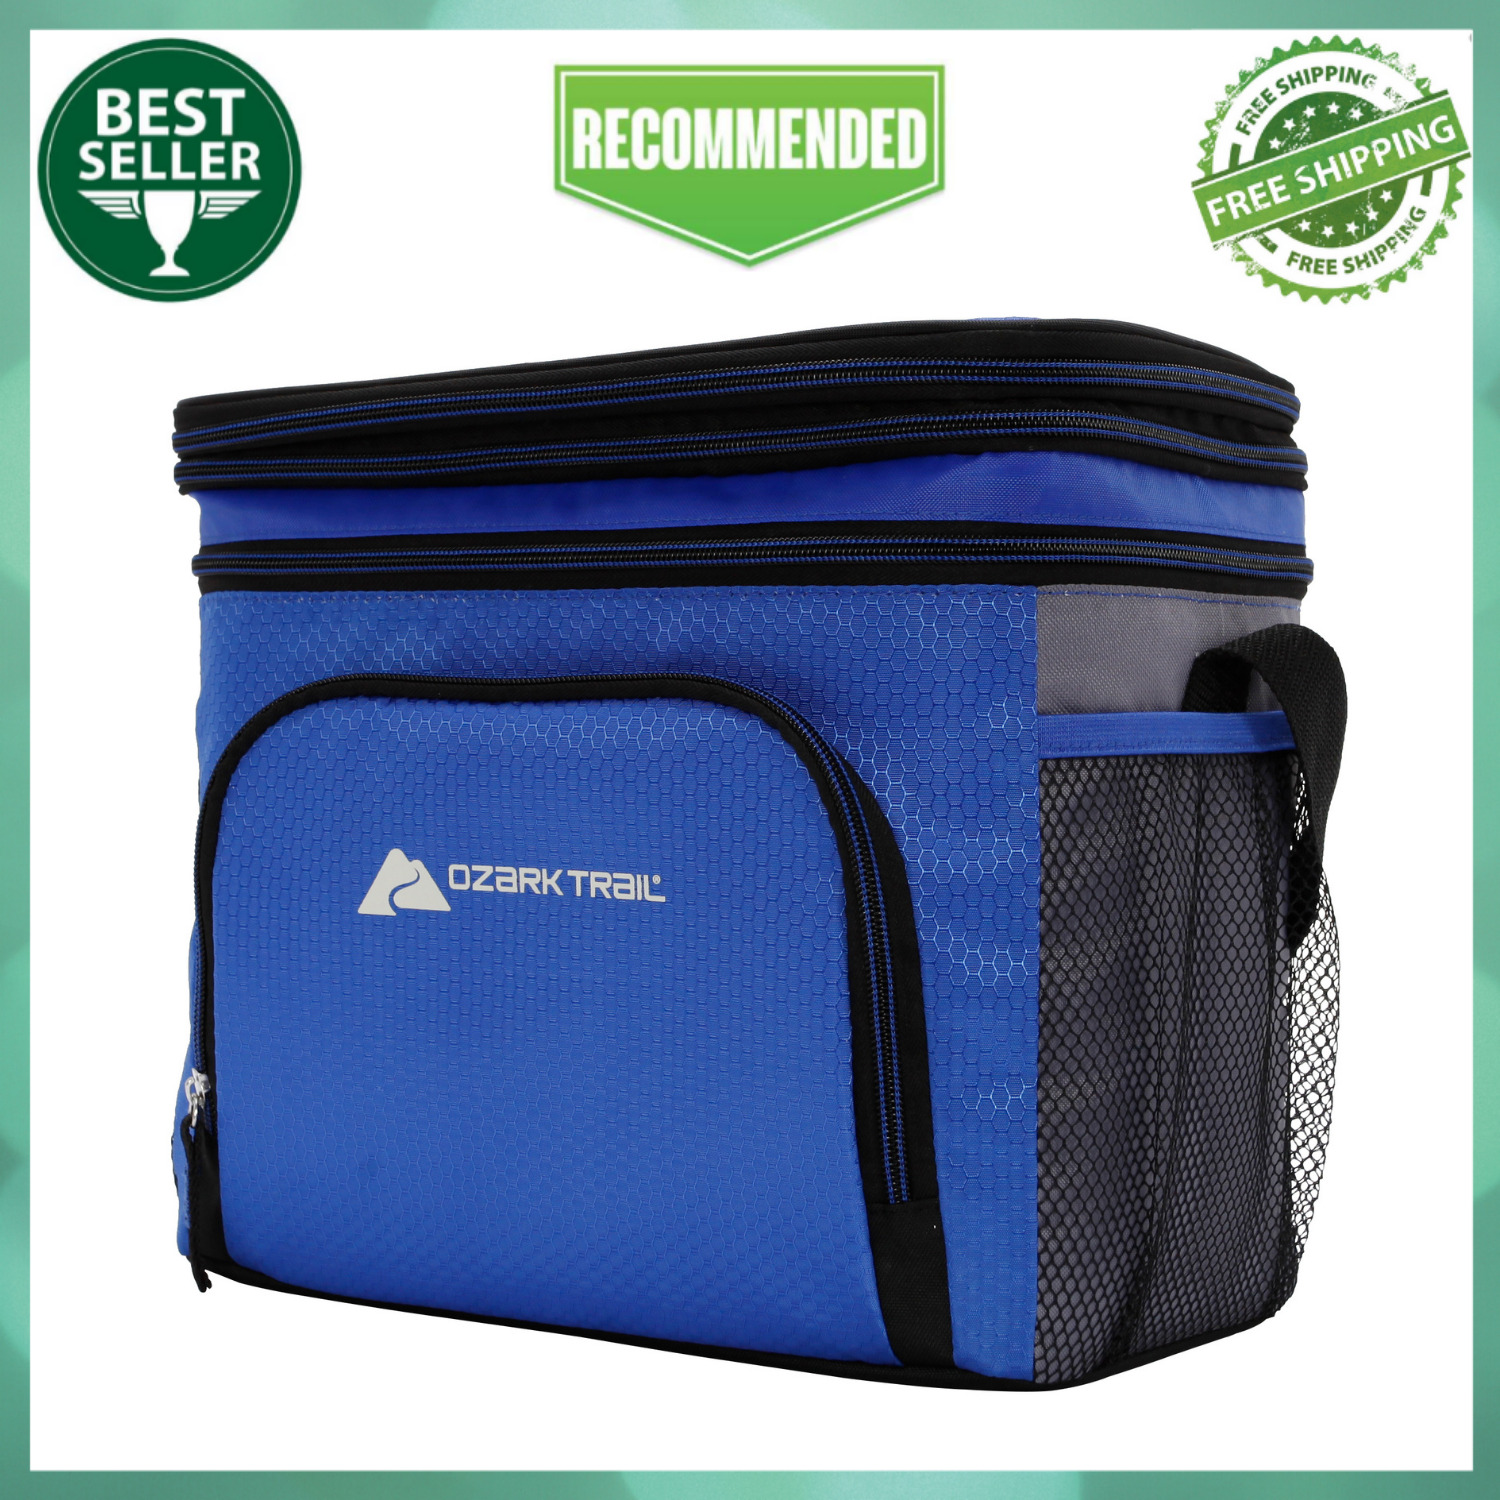 Ozark Trail 12-Can Camping Soft Sided Cooler with Removable Hardliner, Blue